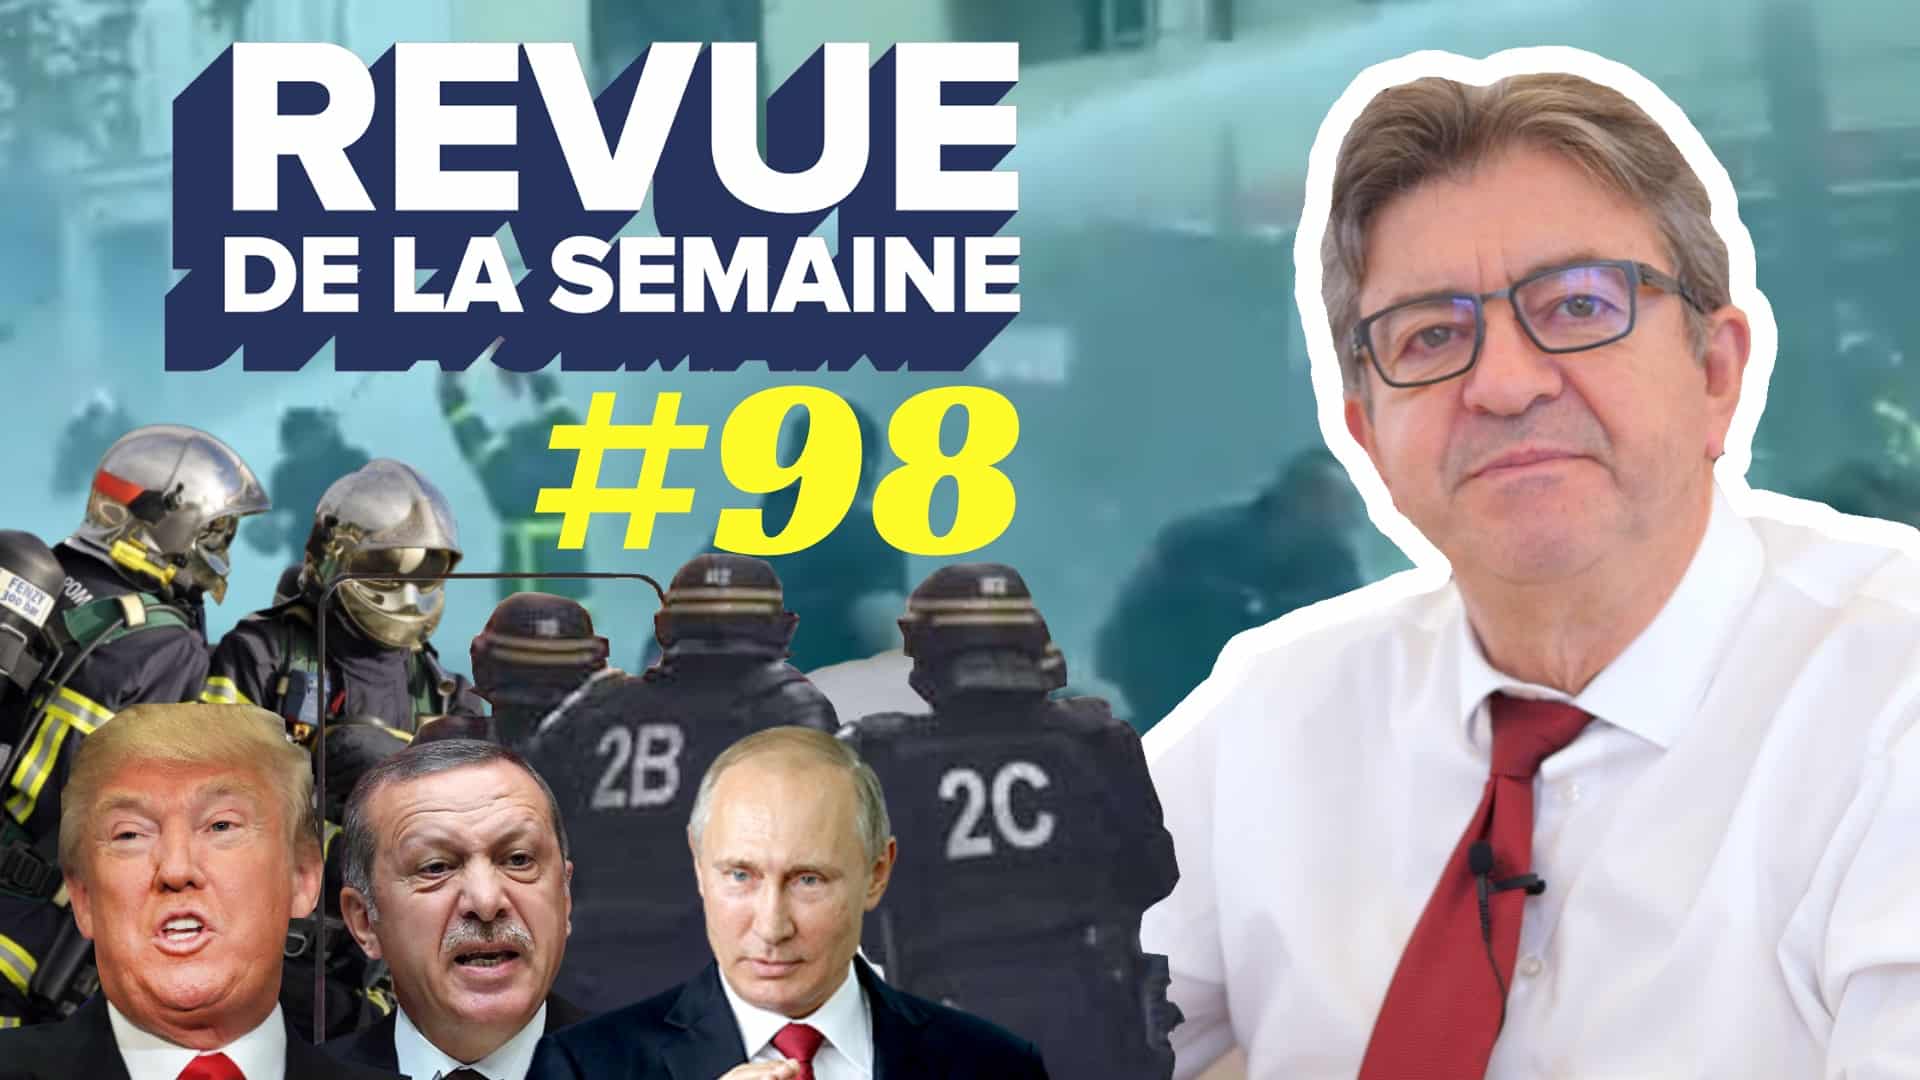 rdls98 voile laicite ibrahima police pompiers syrie tuquie russie